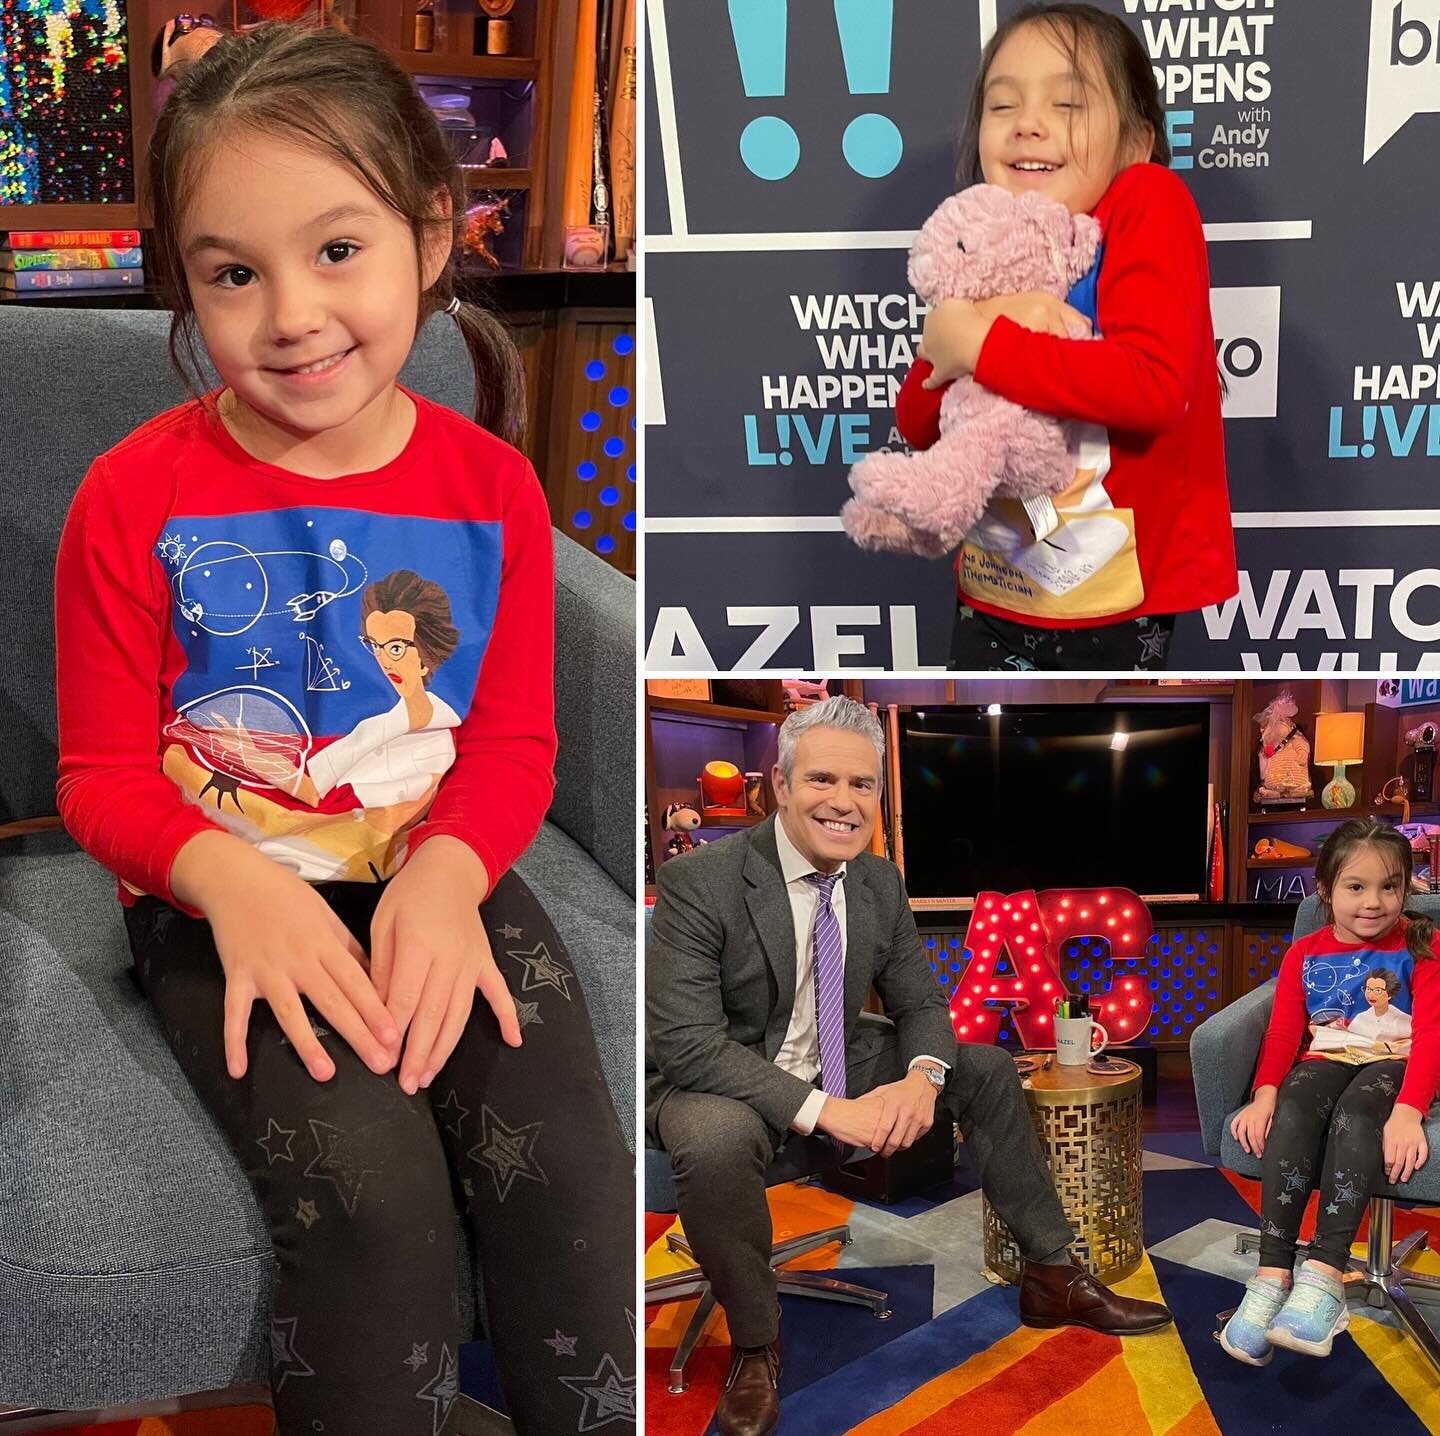 We had a fun day roaming around the #wwhl office